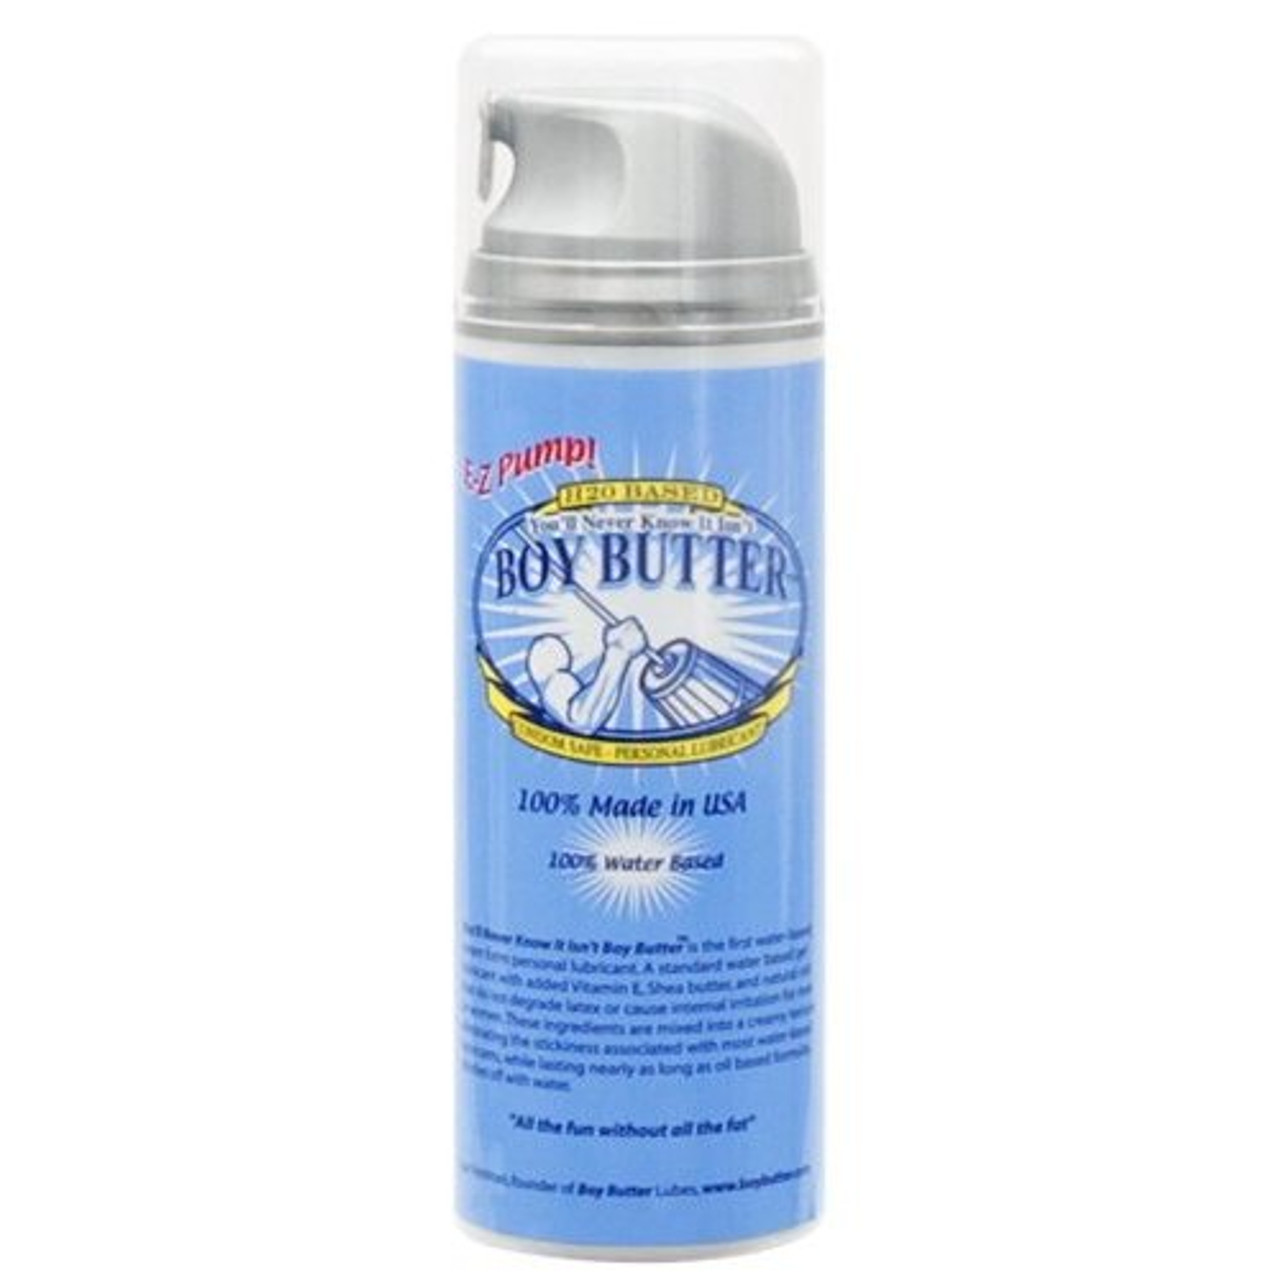 Buy the Boy Butter H20 Water-Based Cream Lubricant 8 oz Tub